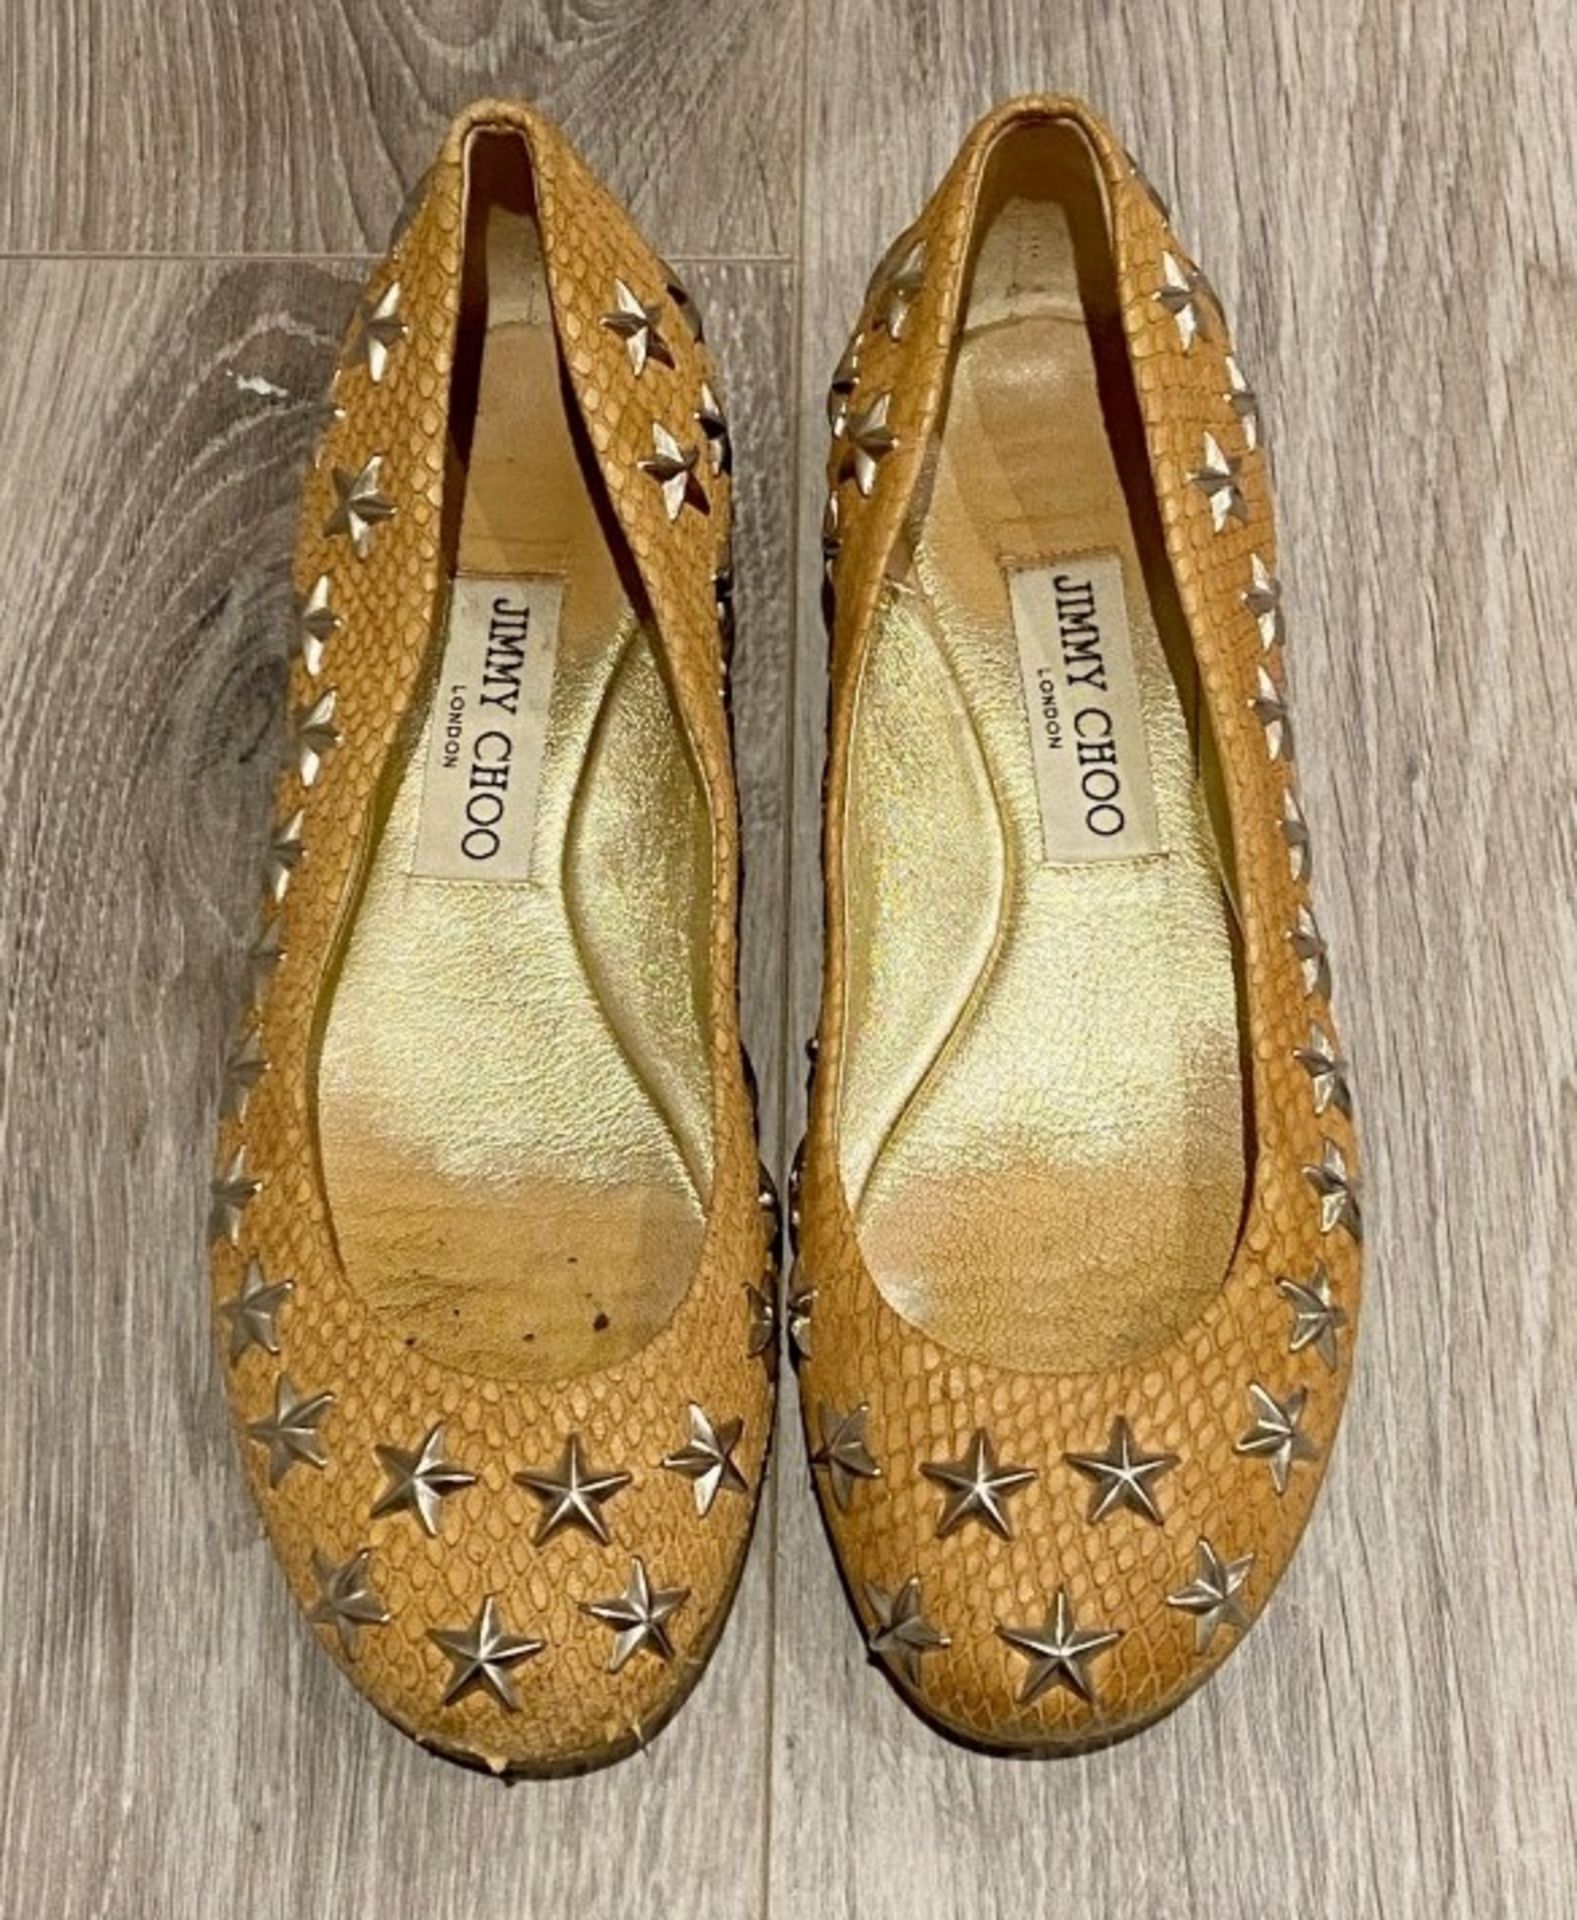 1 x Pair Of Genuine Jimmy Choo Flats In Tan - Size: 36 - Preowned in Very Good Condition - Ref: LOT1